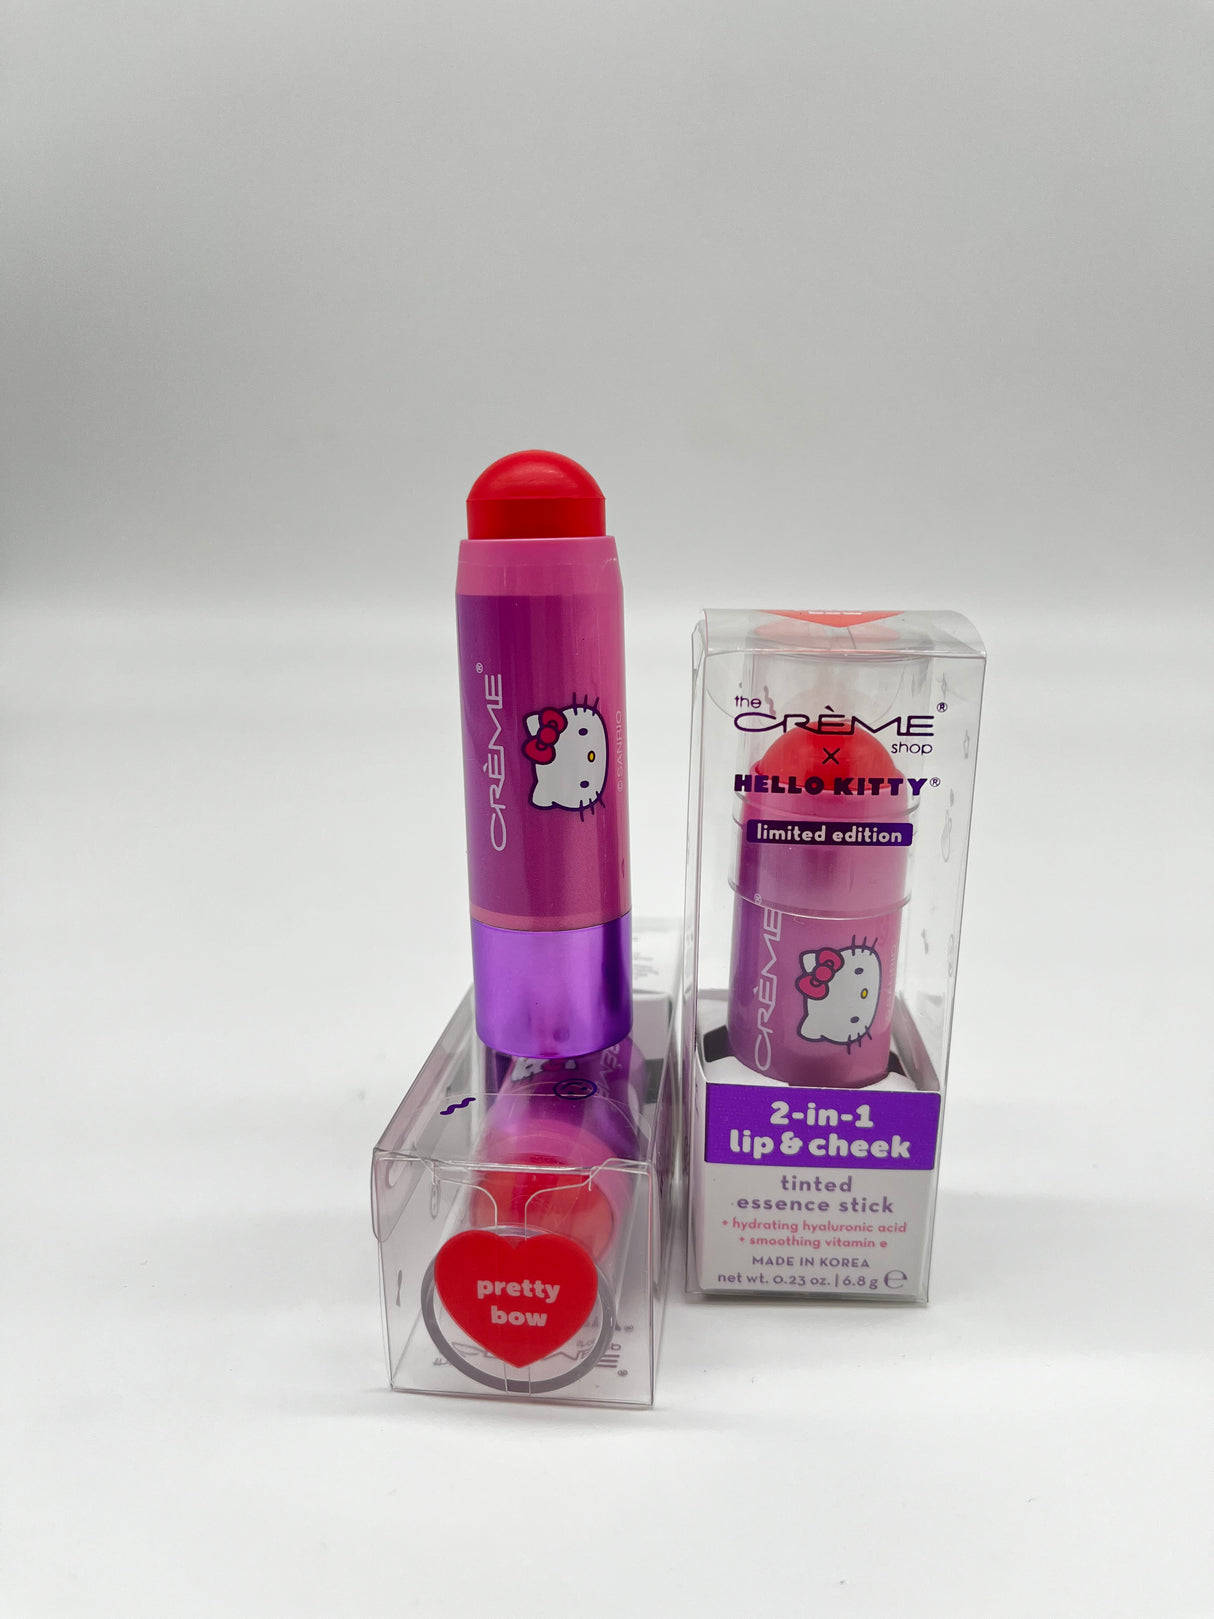 THE CREME SHOP- 2 IN 1 LIP AND CHEEK- TINTED ESSENCE STICK- 4PCS